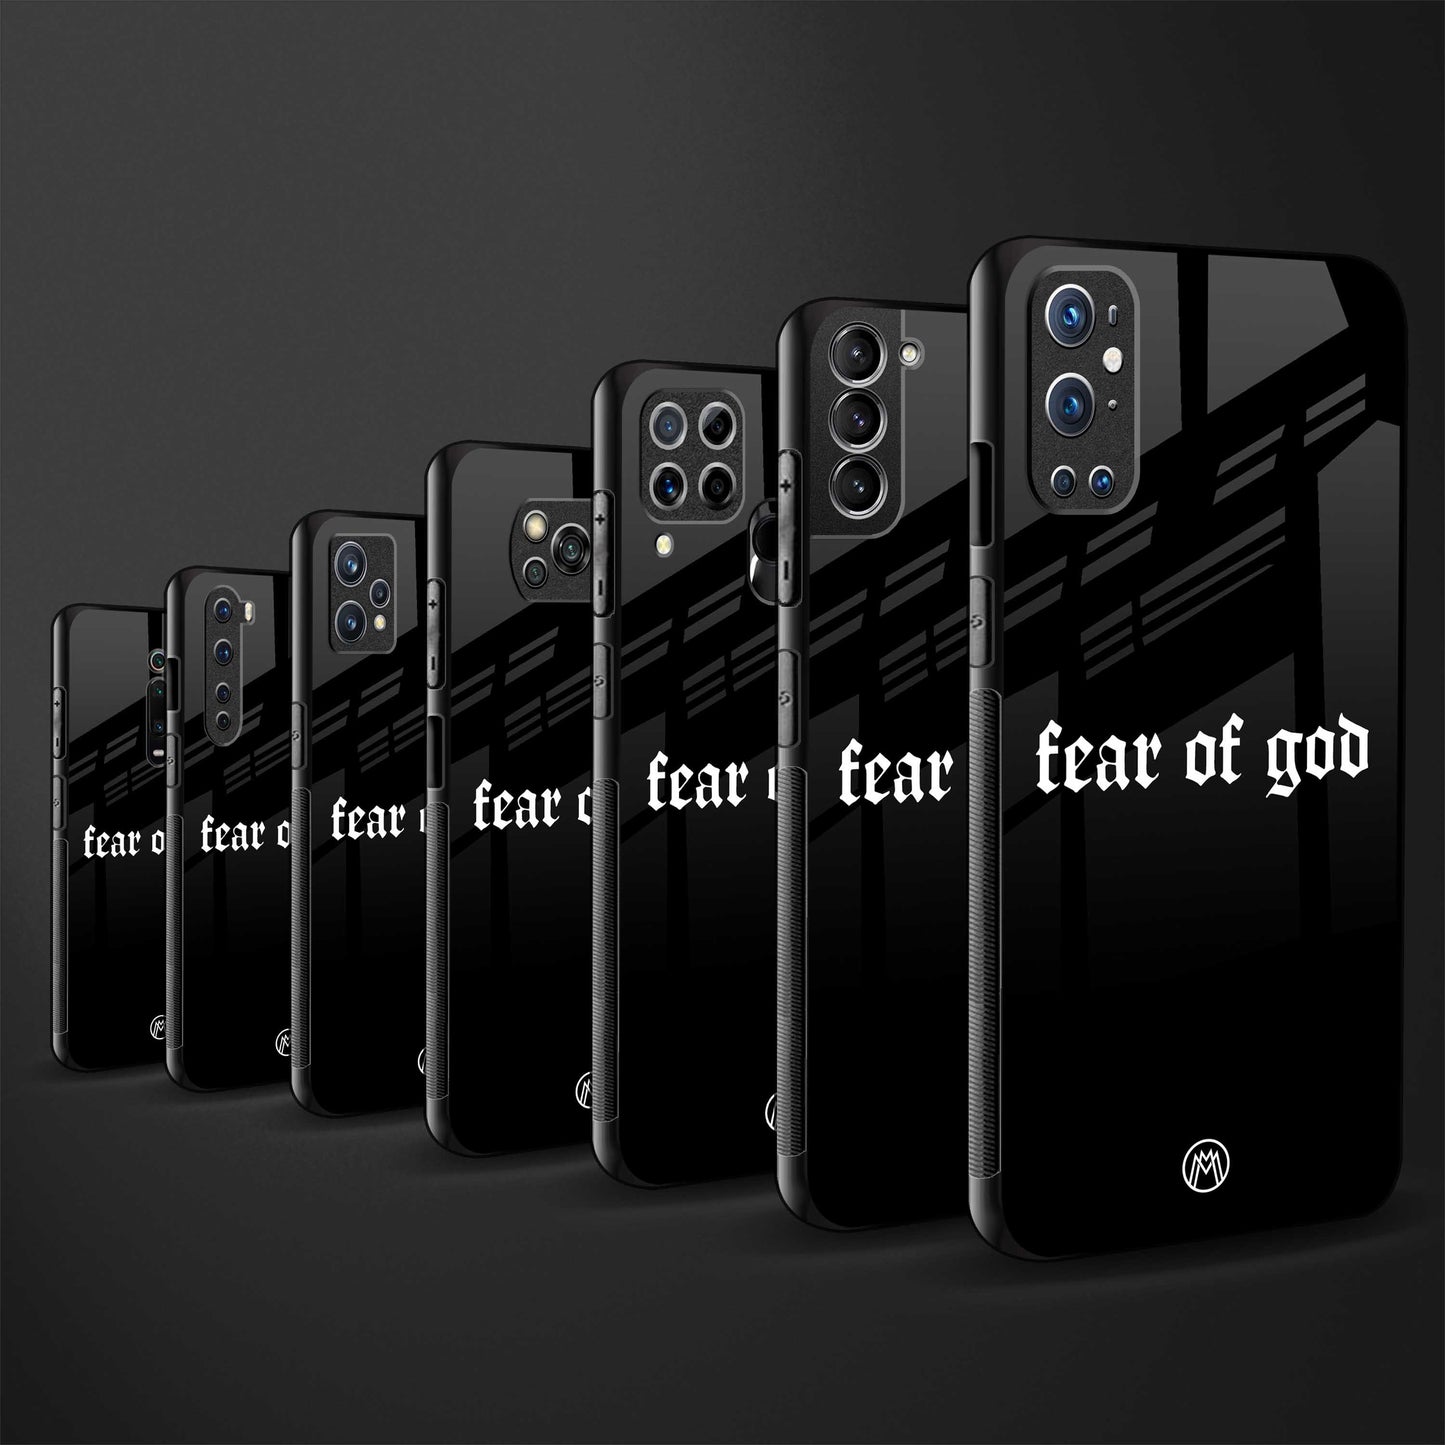 fear of god phone cover for samsung galaxy s20 ultra